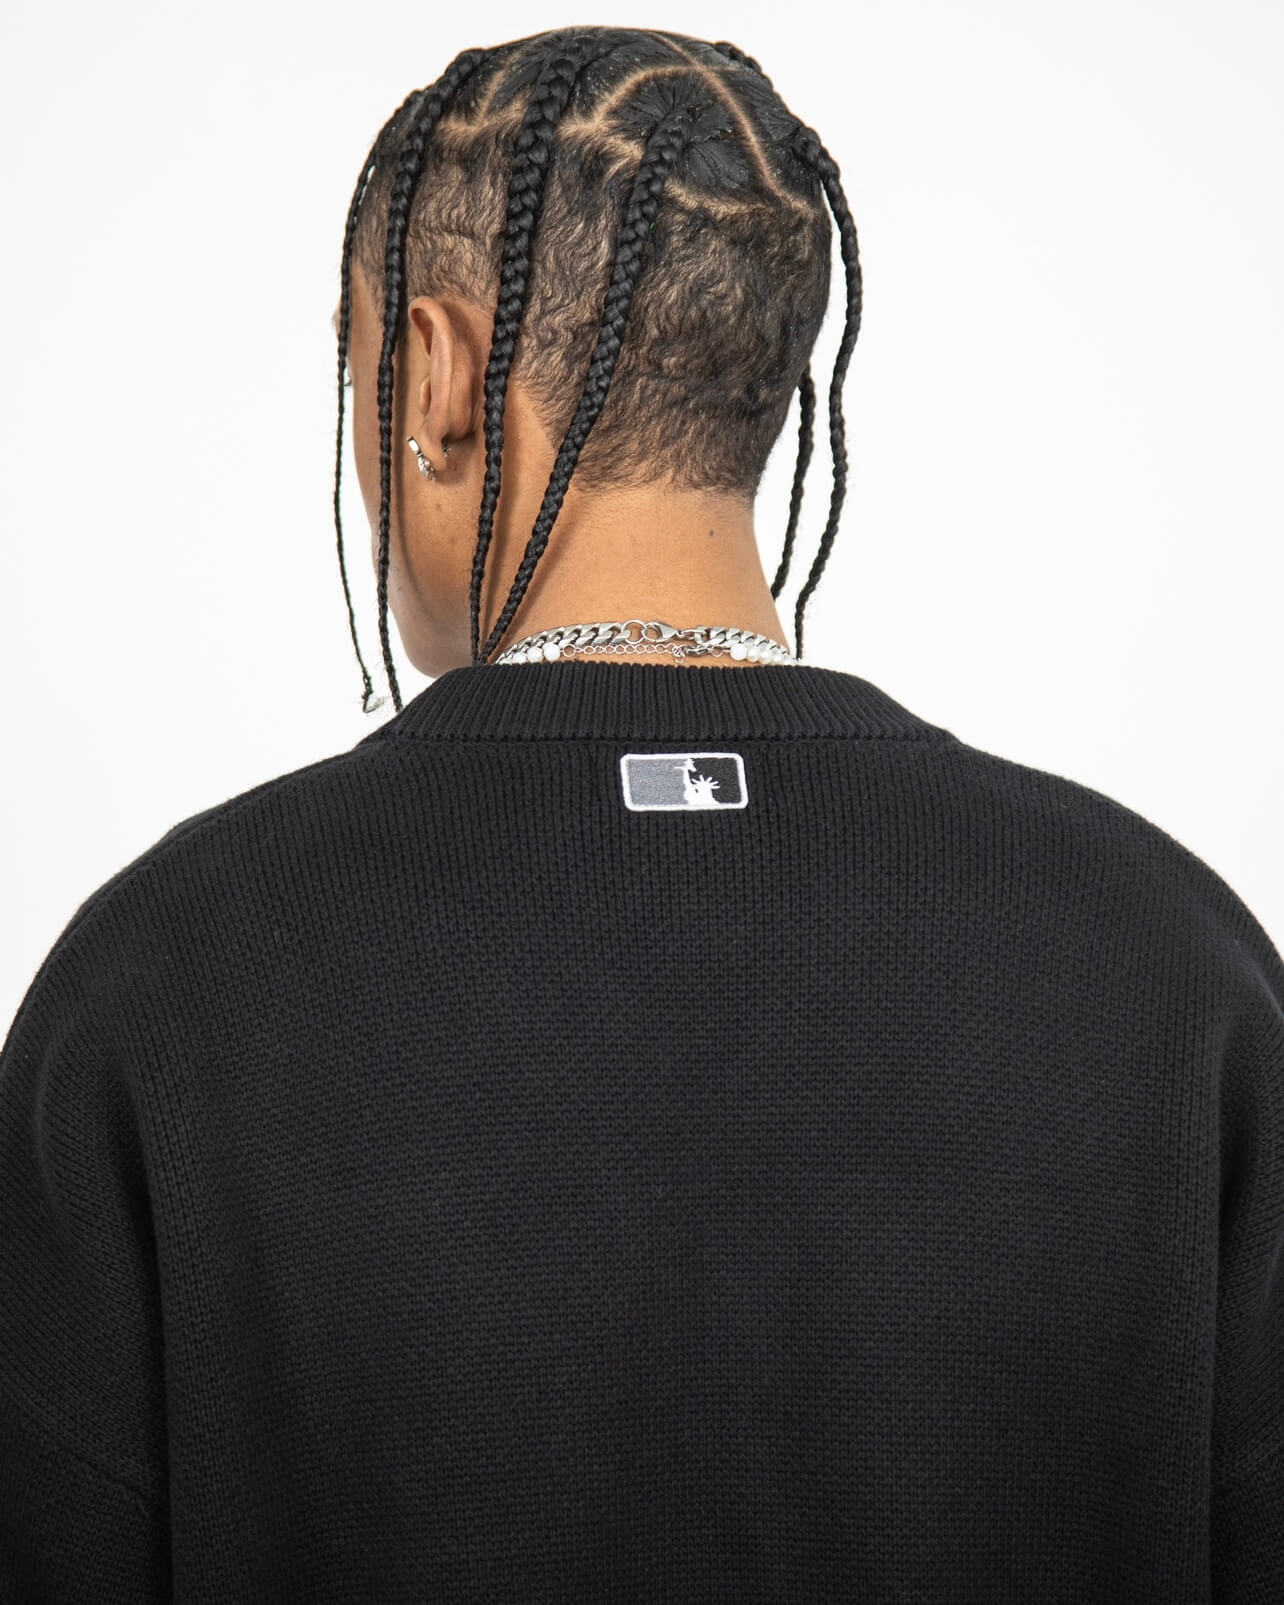 Closer look at the back of the sweater with an embroidered square patch below the nape of the neck and collar. The patch contains the upper half of the Statue of Liberty in a "NY Tough" inspired logo.